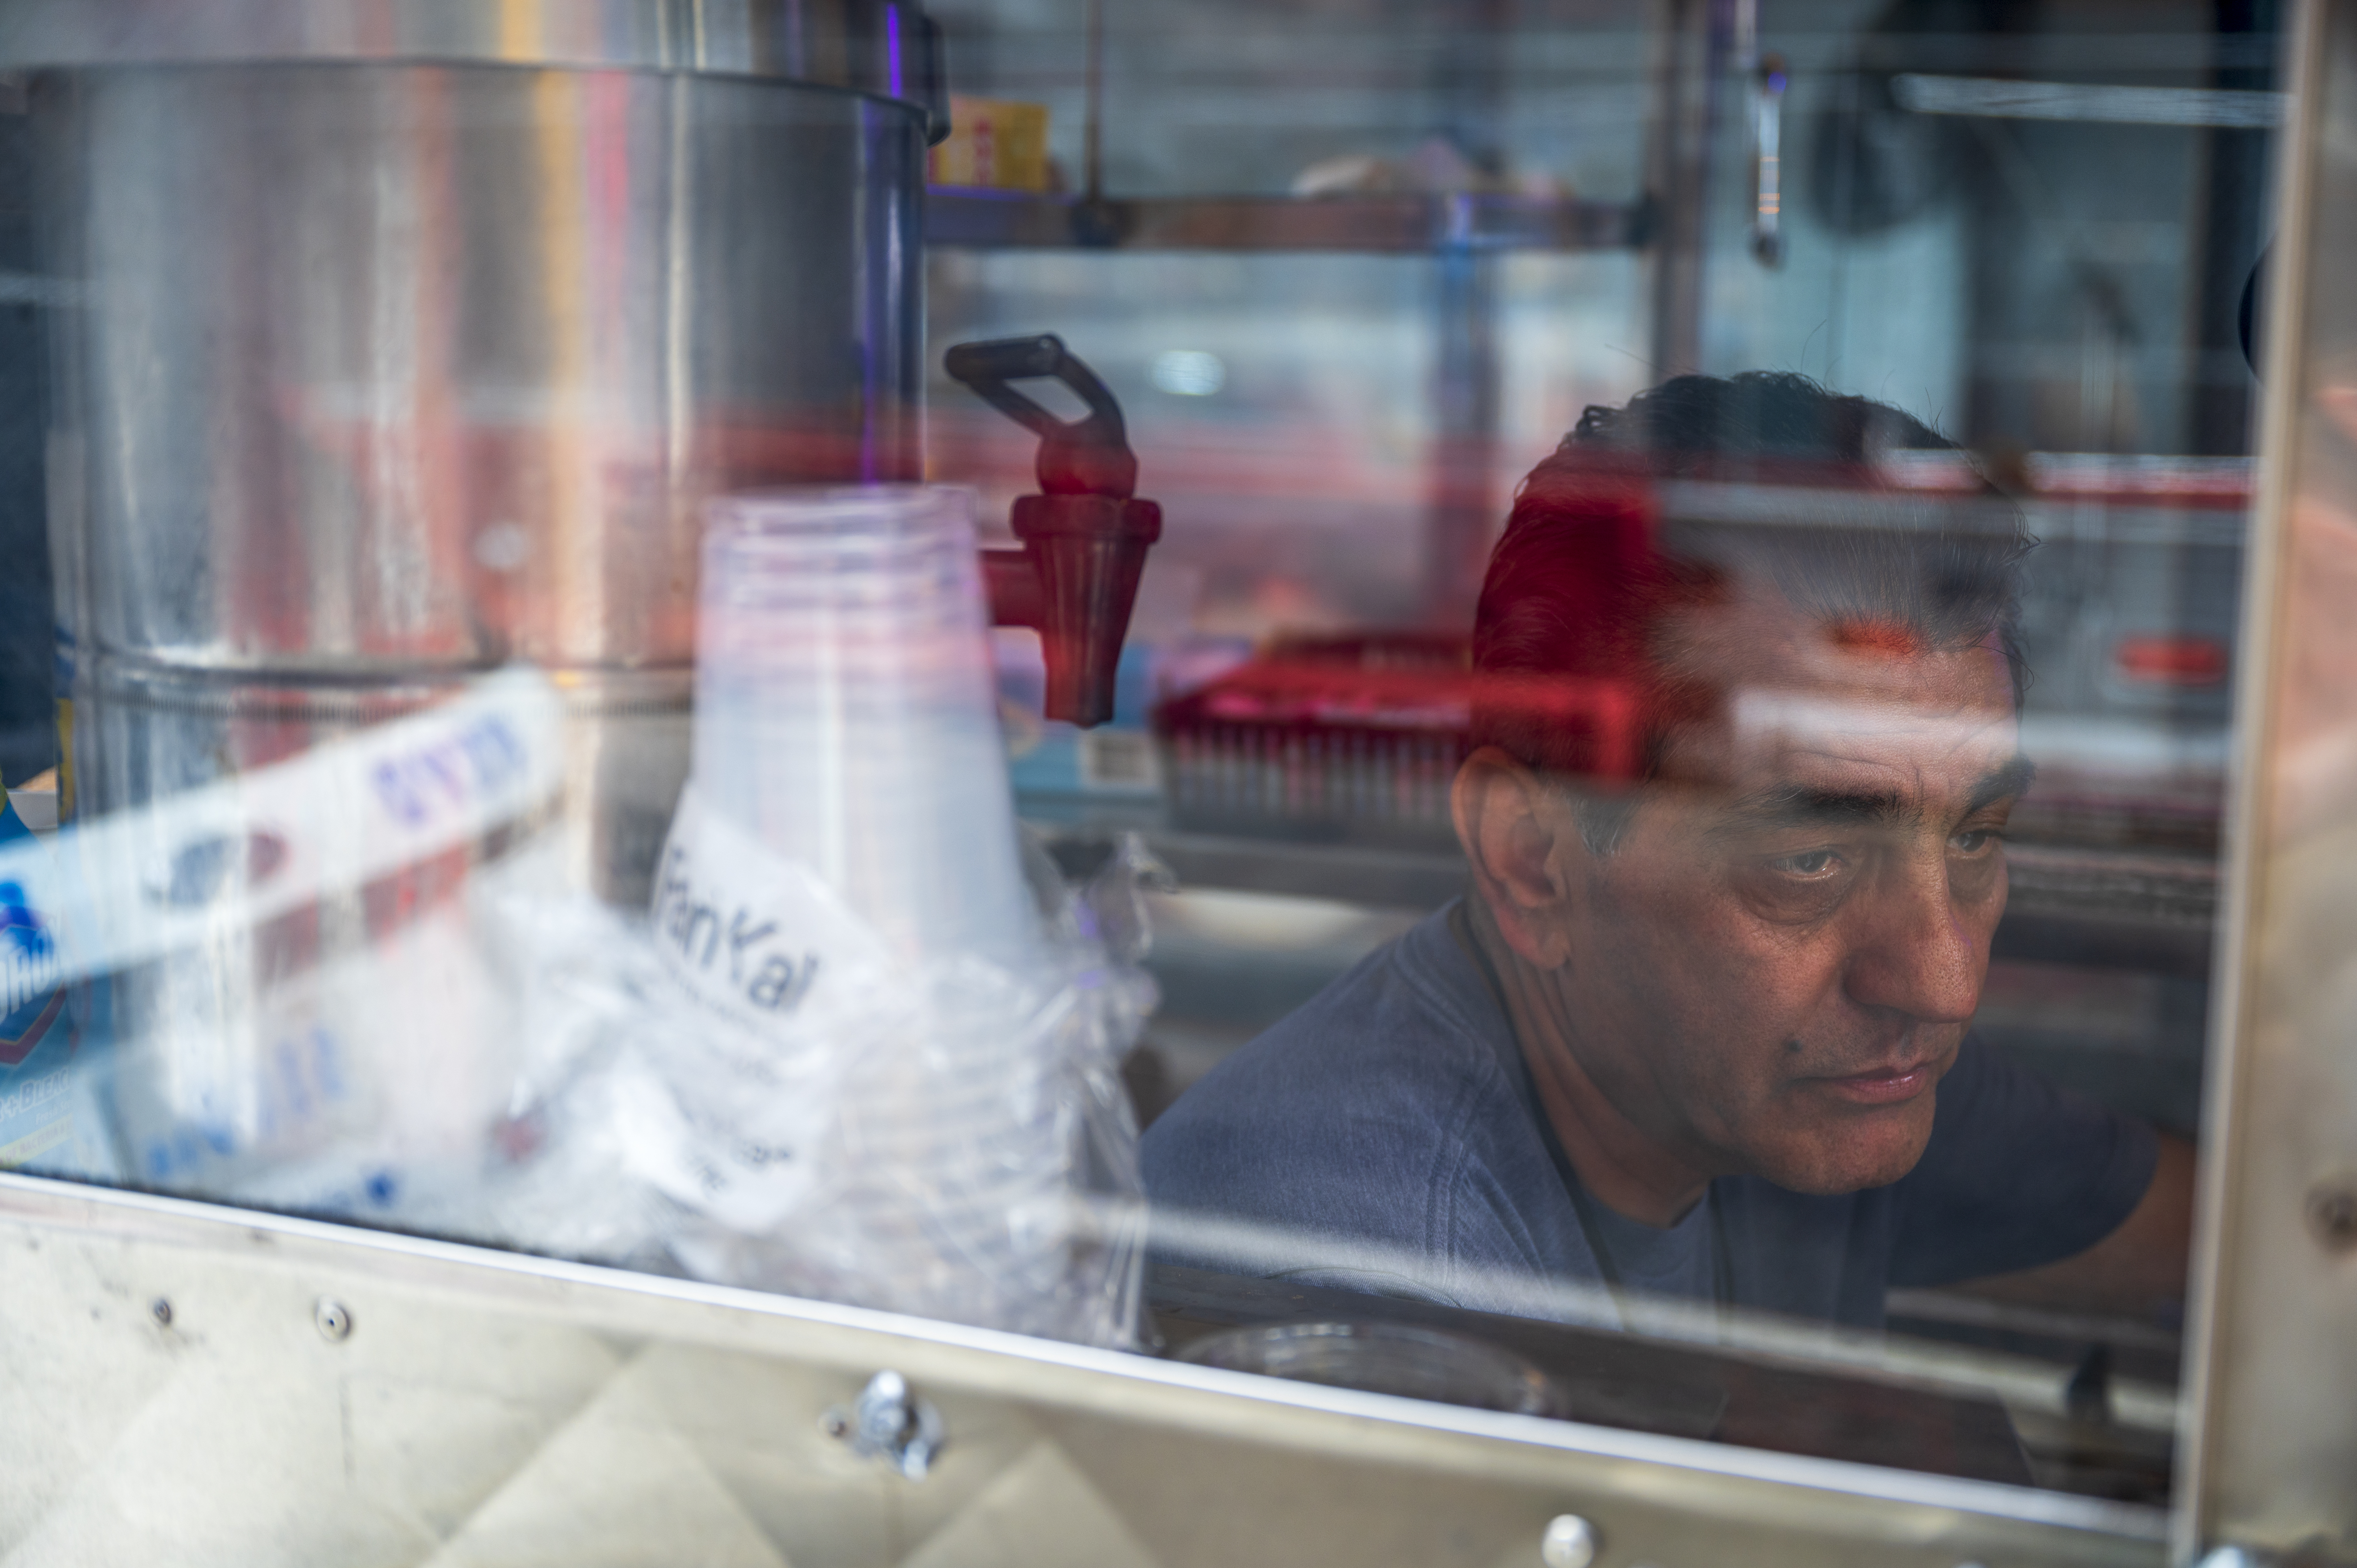 Afghanistan-born Bashir Saleh, 64, in his coffee and pastries food cart on West 43rd Street.